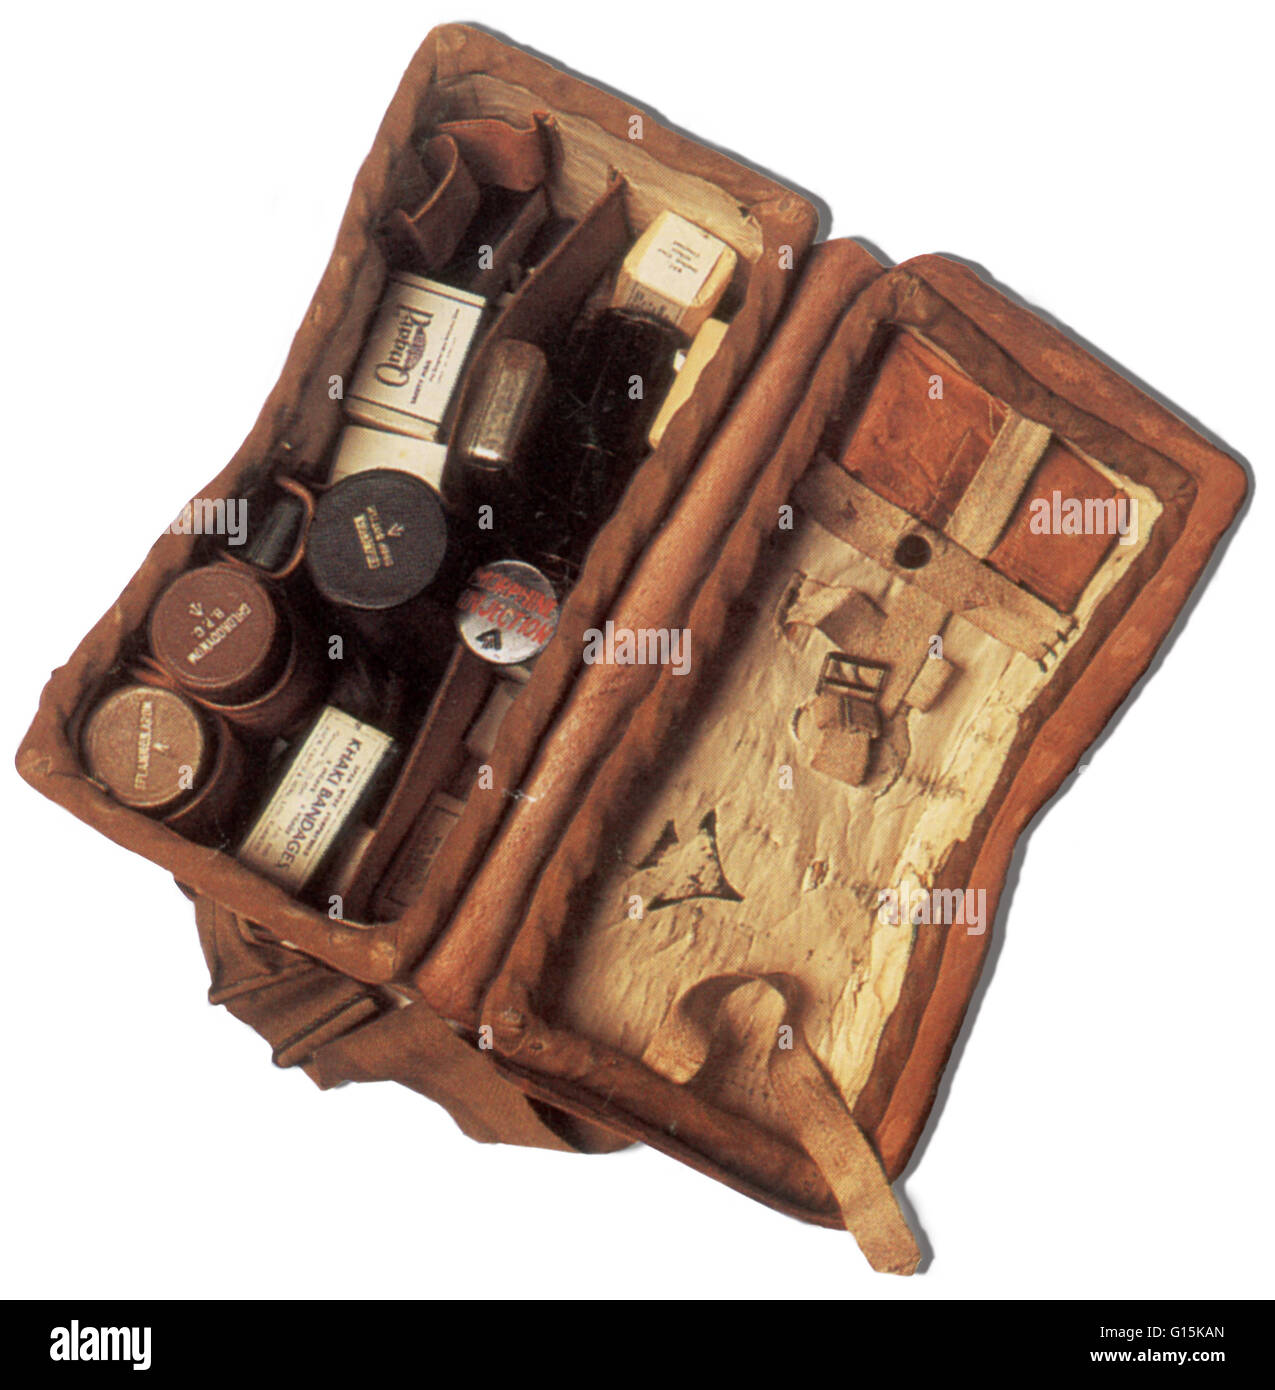 Dr. Andrew Duncan's WWII field kit, containing bandages, morphine, and other emergency medical supplies.  Duncan was an army field surgeon during the Second World War.  He was sent to the Royal Army Medical Corps (RAMC) and given the rank of Captain.  On Stock Photo